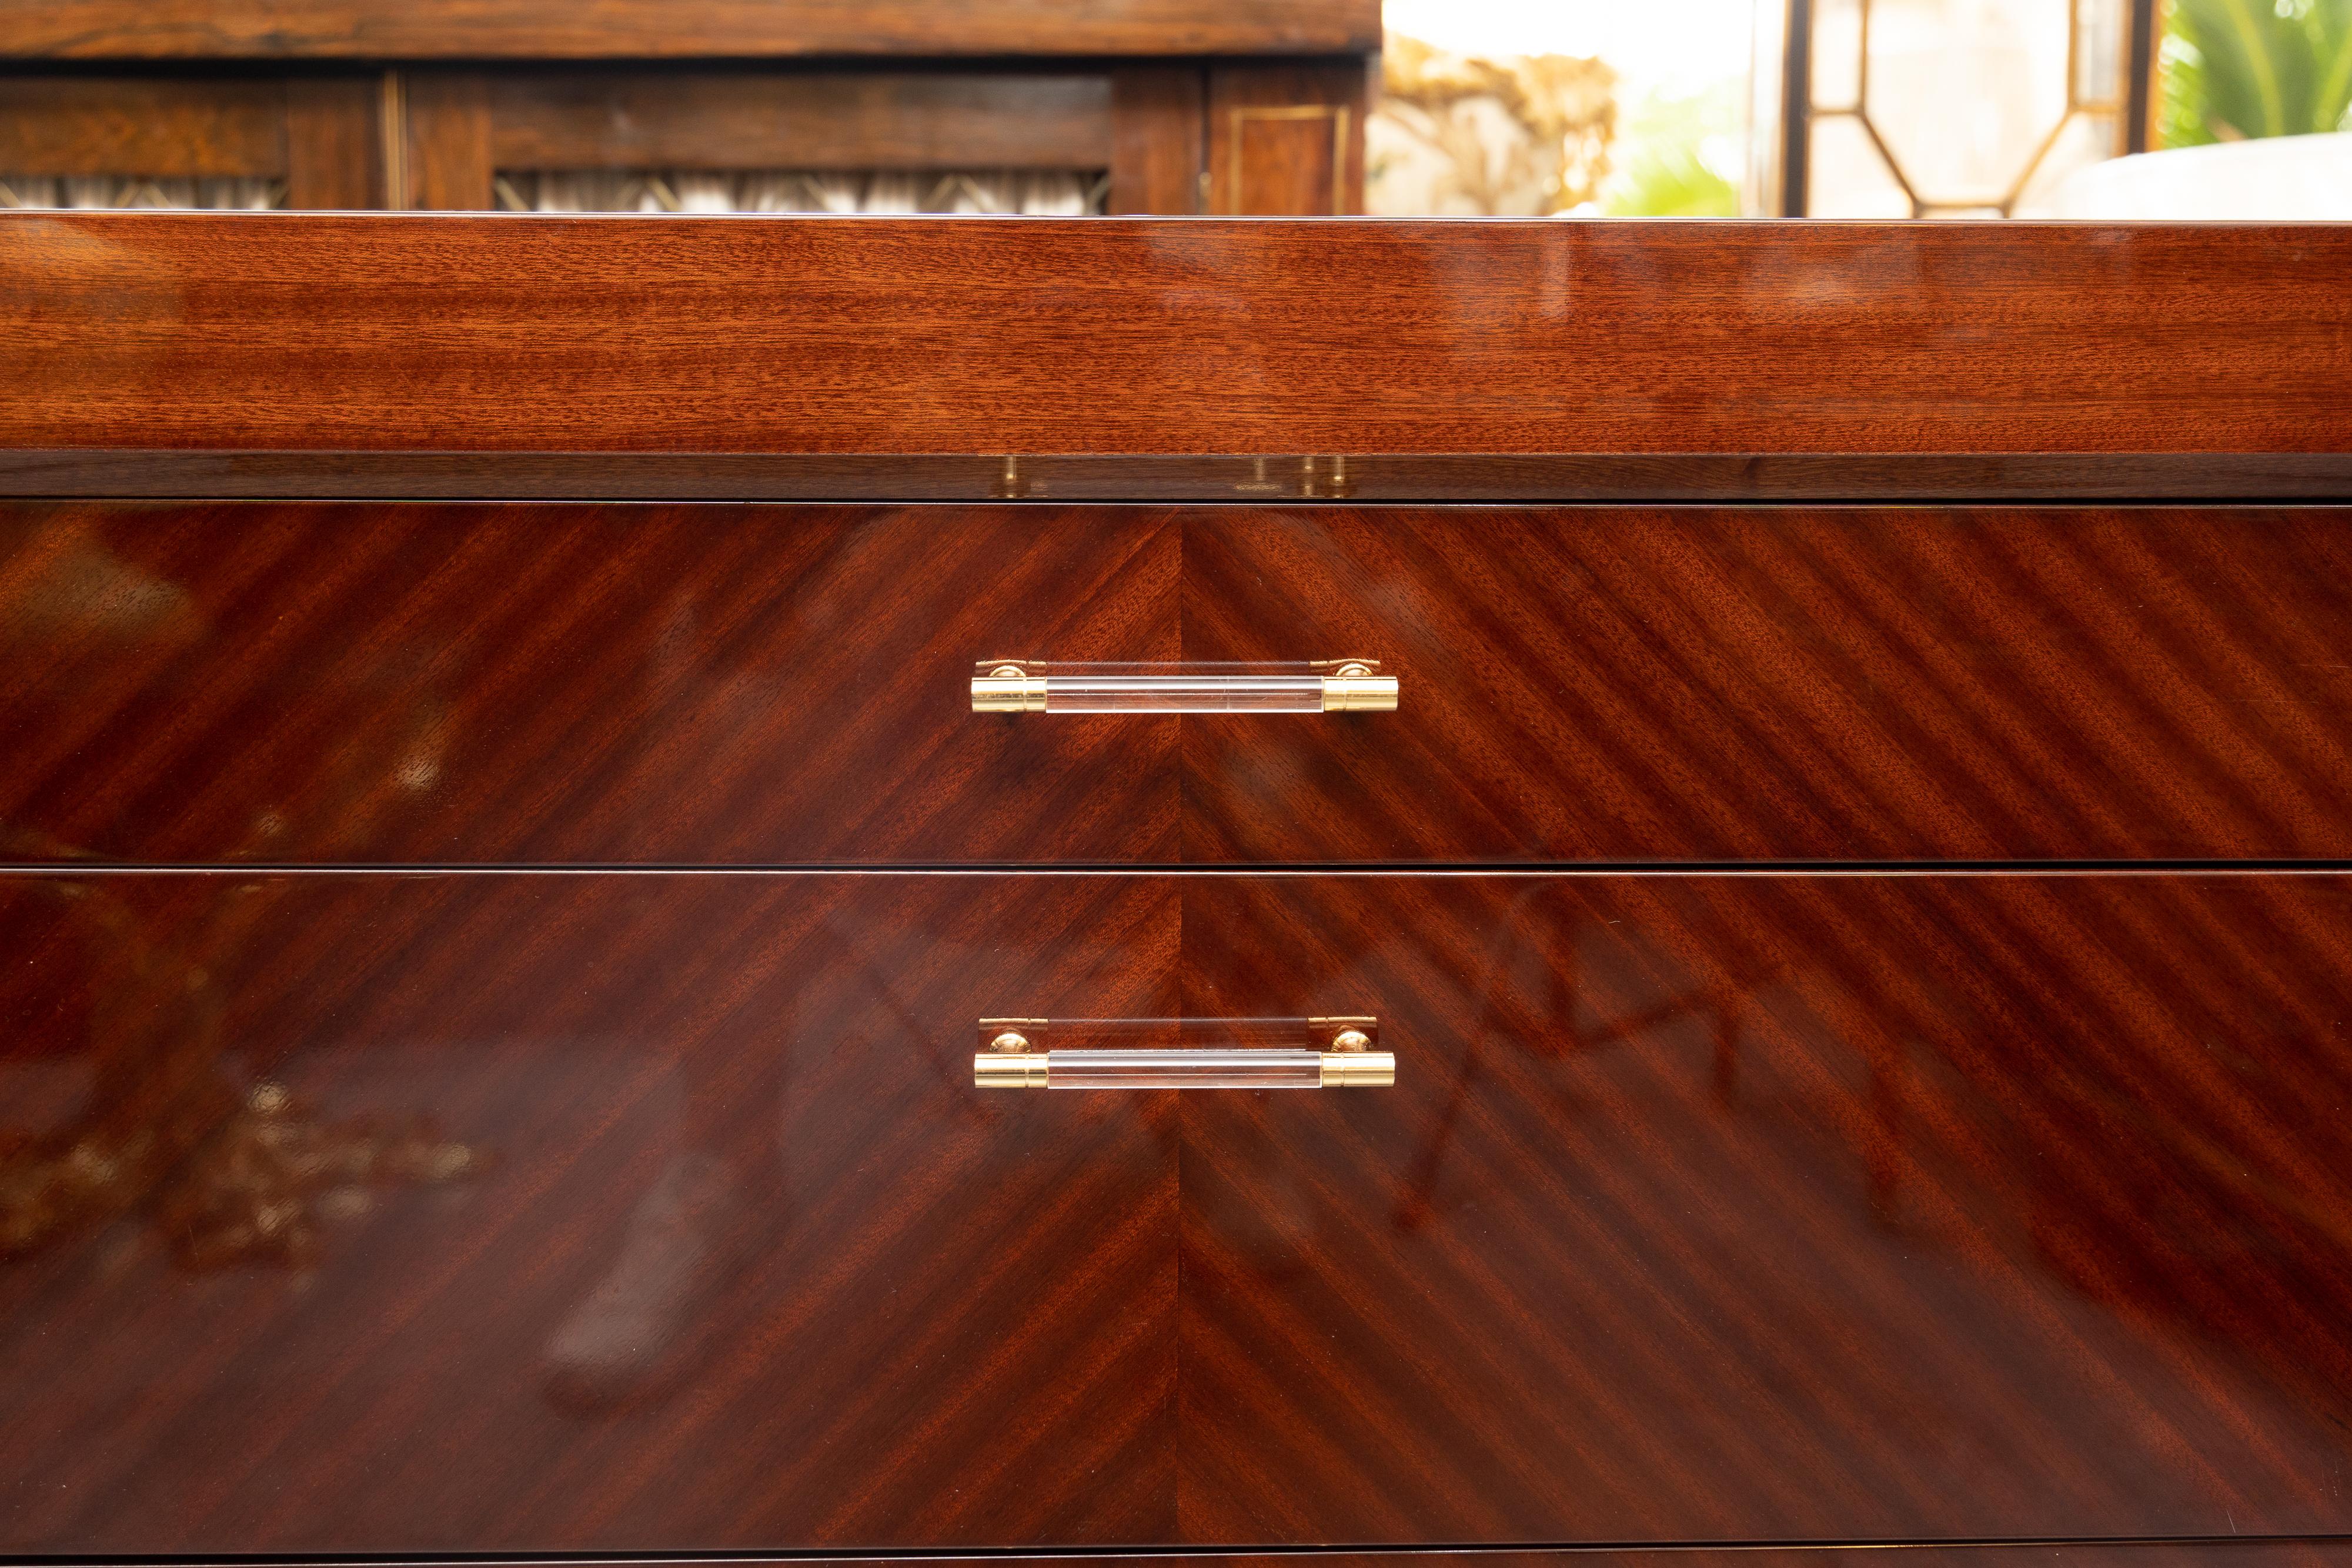 A spectacular, highly polished midcentury chests of drawers. The drawers are graduated from narrow to a wide drawer are the bottom. Bench made. Lucite and brass handles. Pair available. Priced individually.